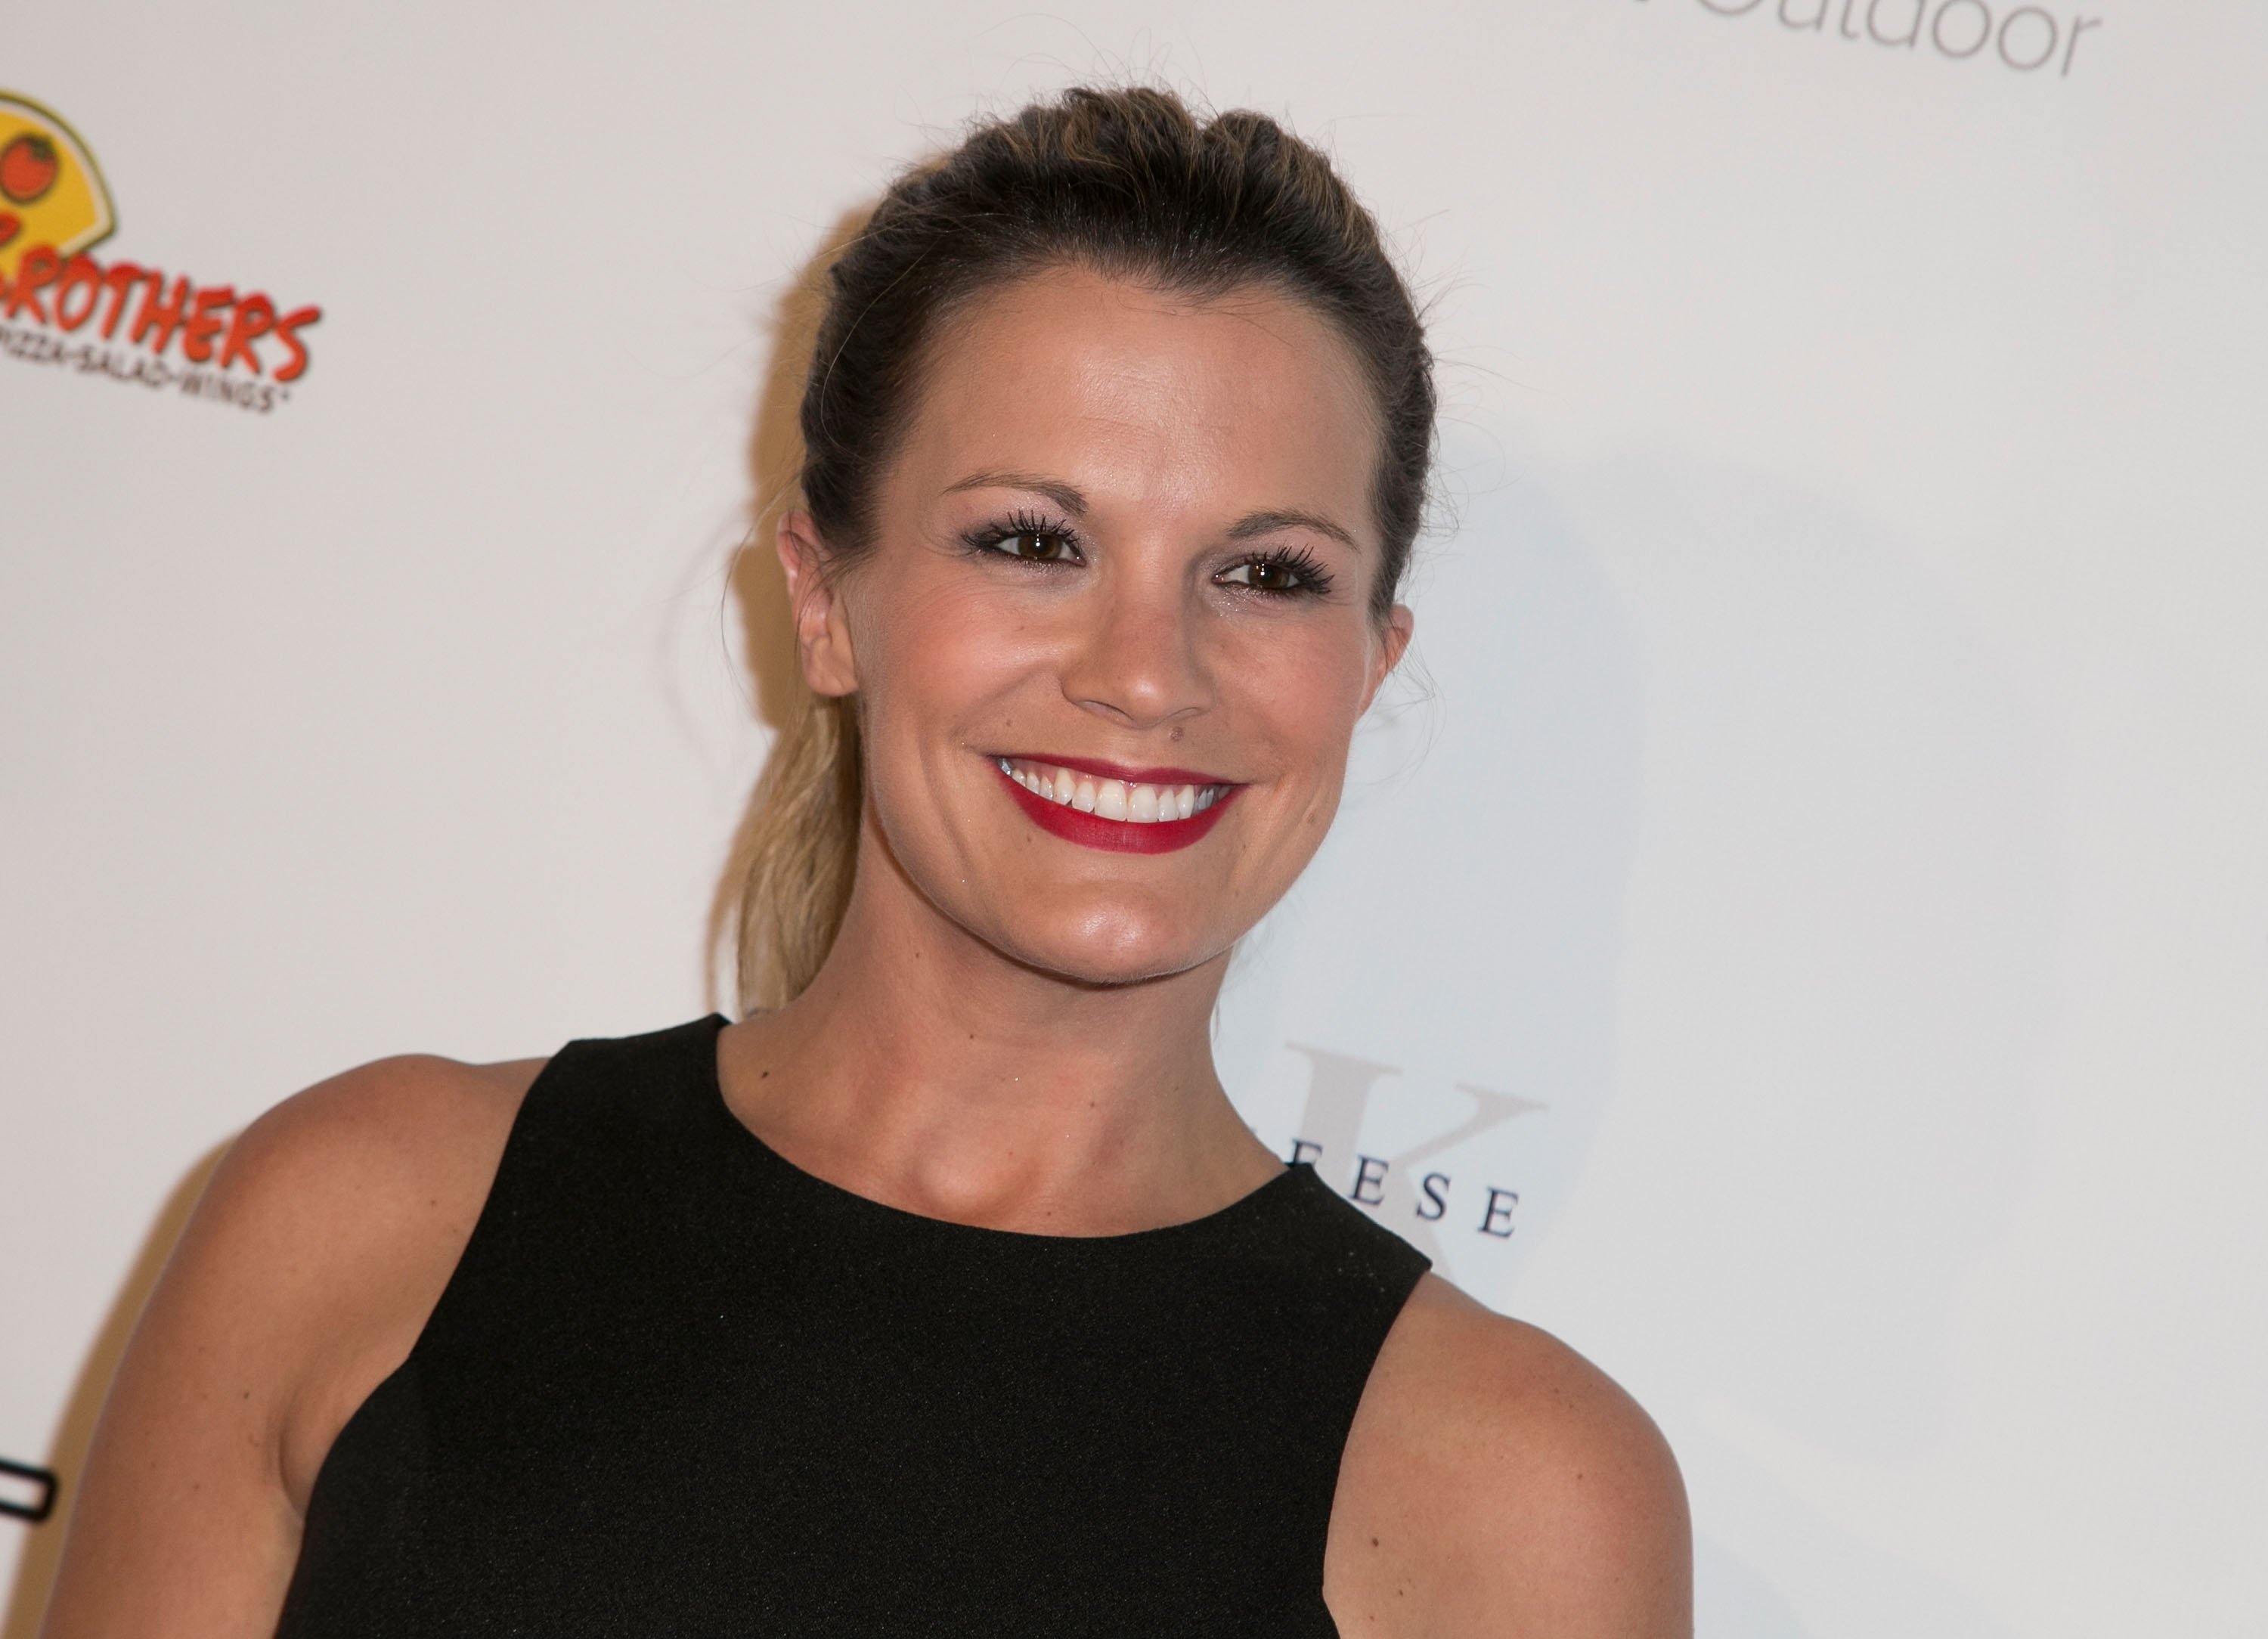 'The Young and the Restless' actor Melissa Claire Egan wearing a black dress during a red carpet appearance.